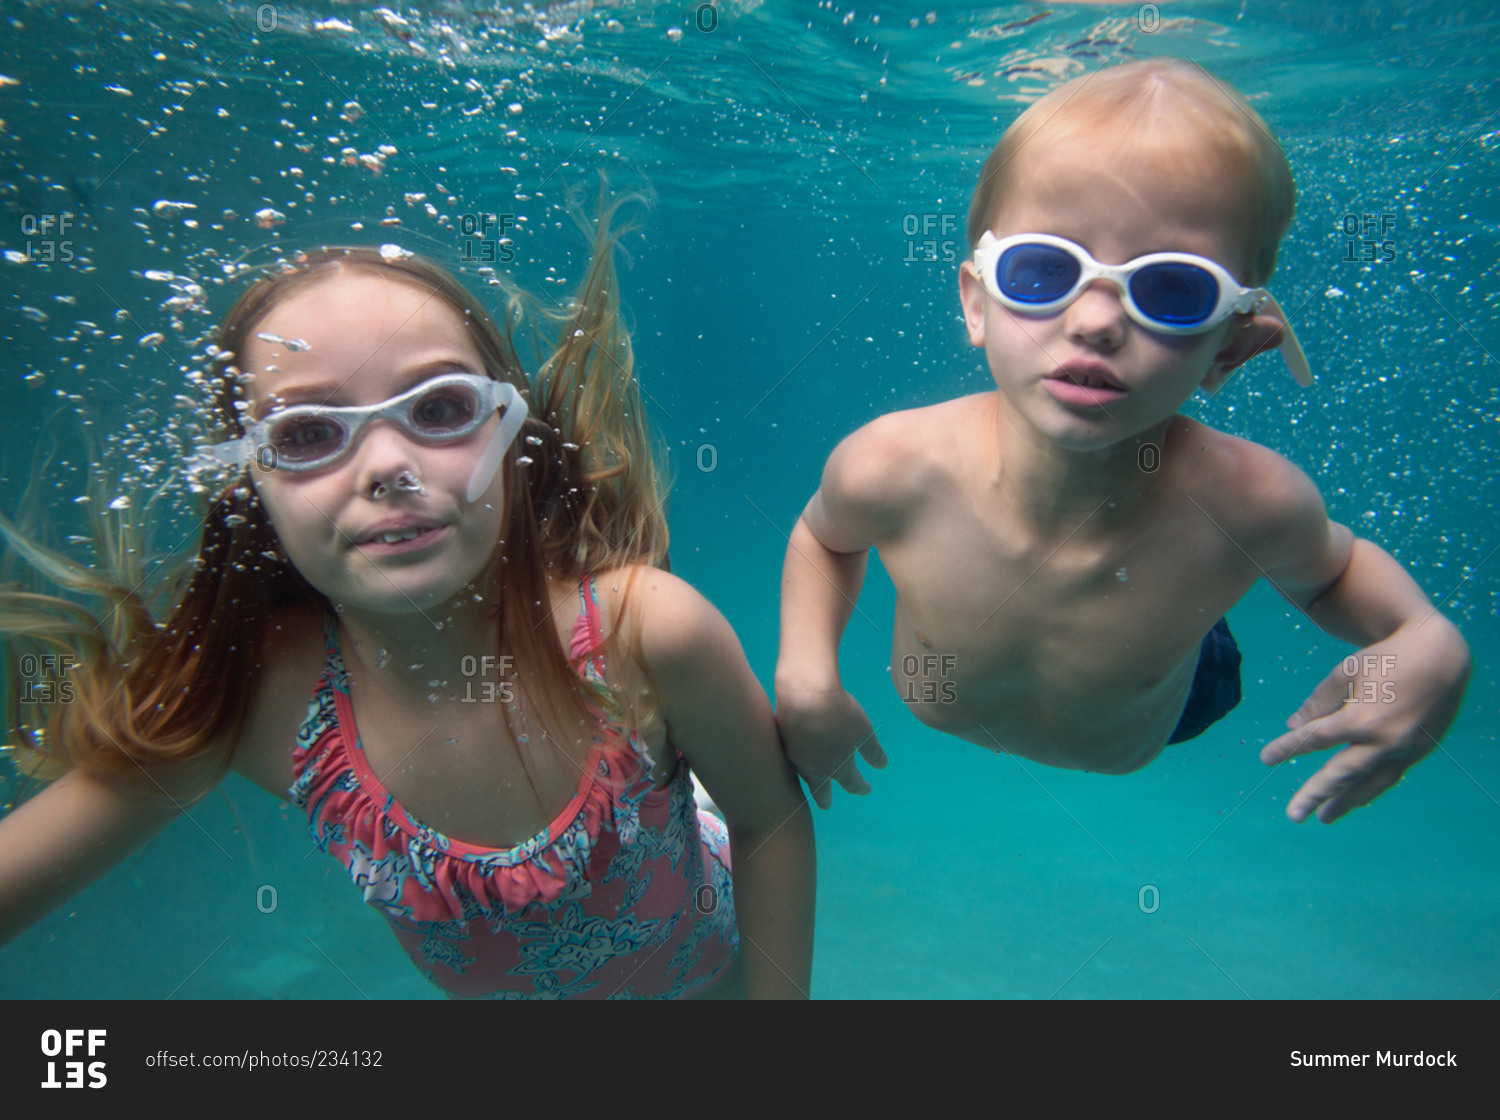 Children swimming together in a swimming pool